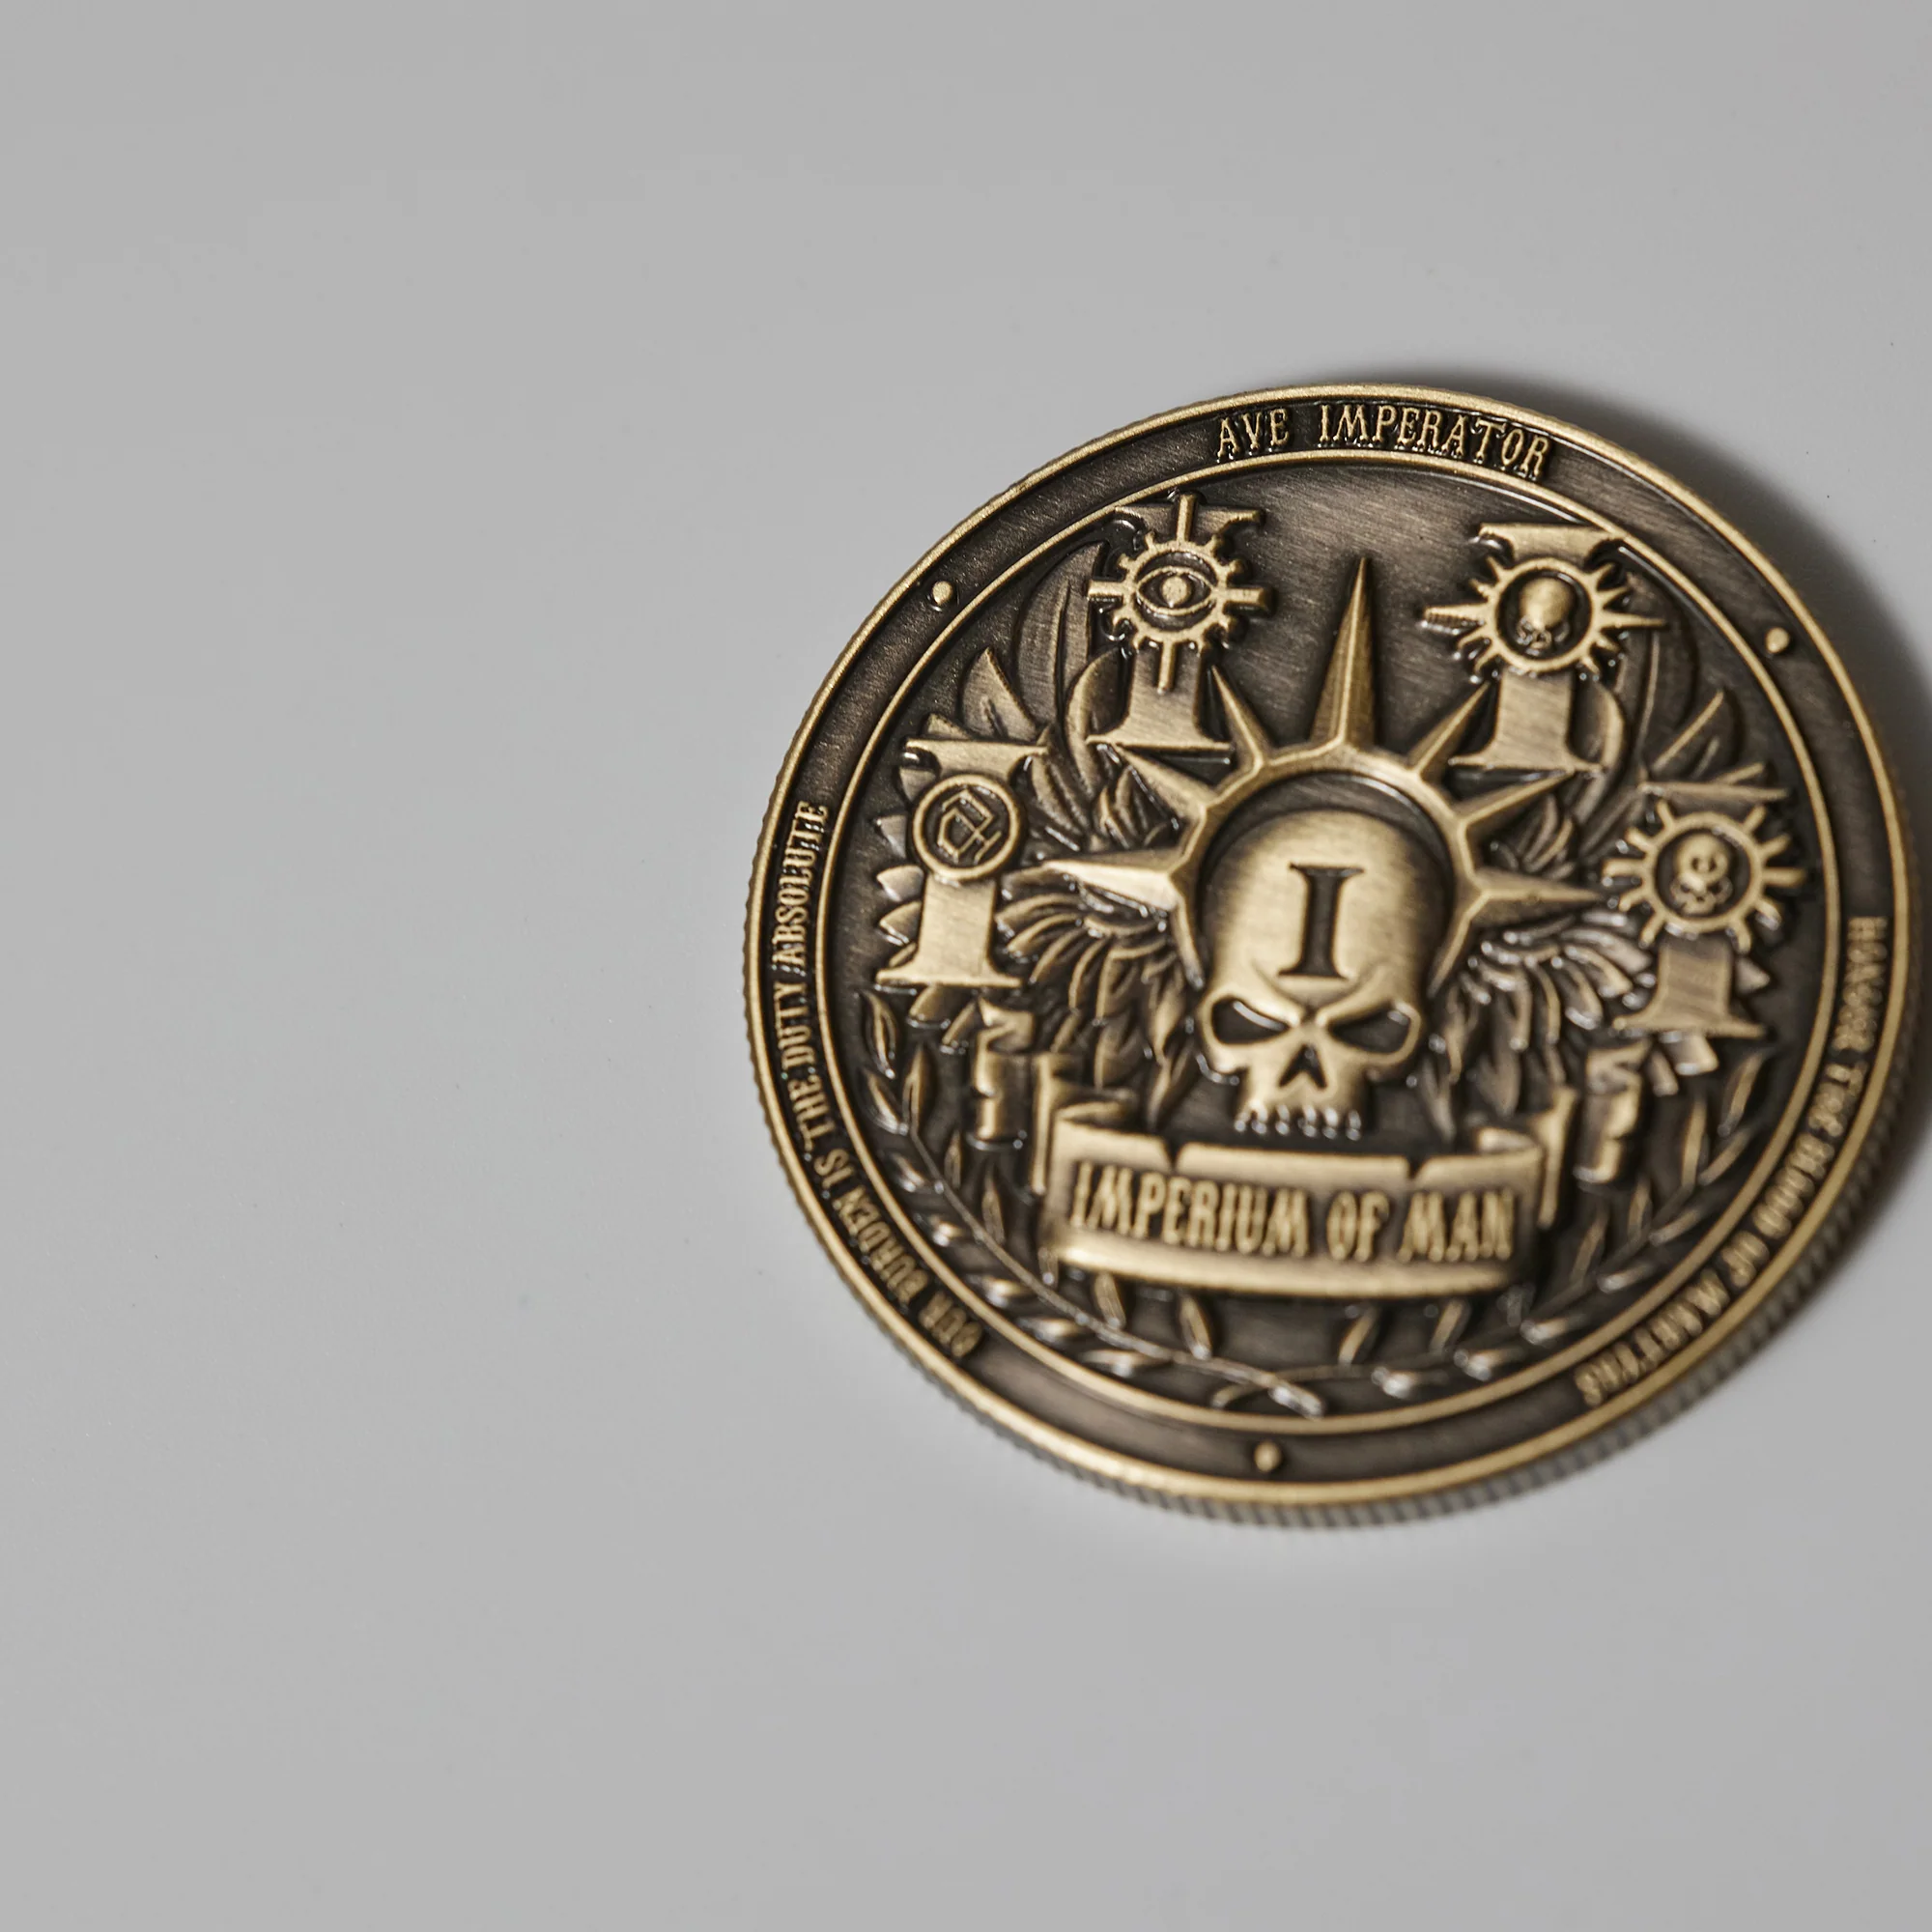 Collectible Coin: Imperium of Man-1701942493.webp